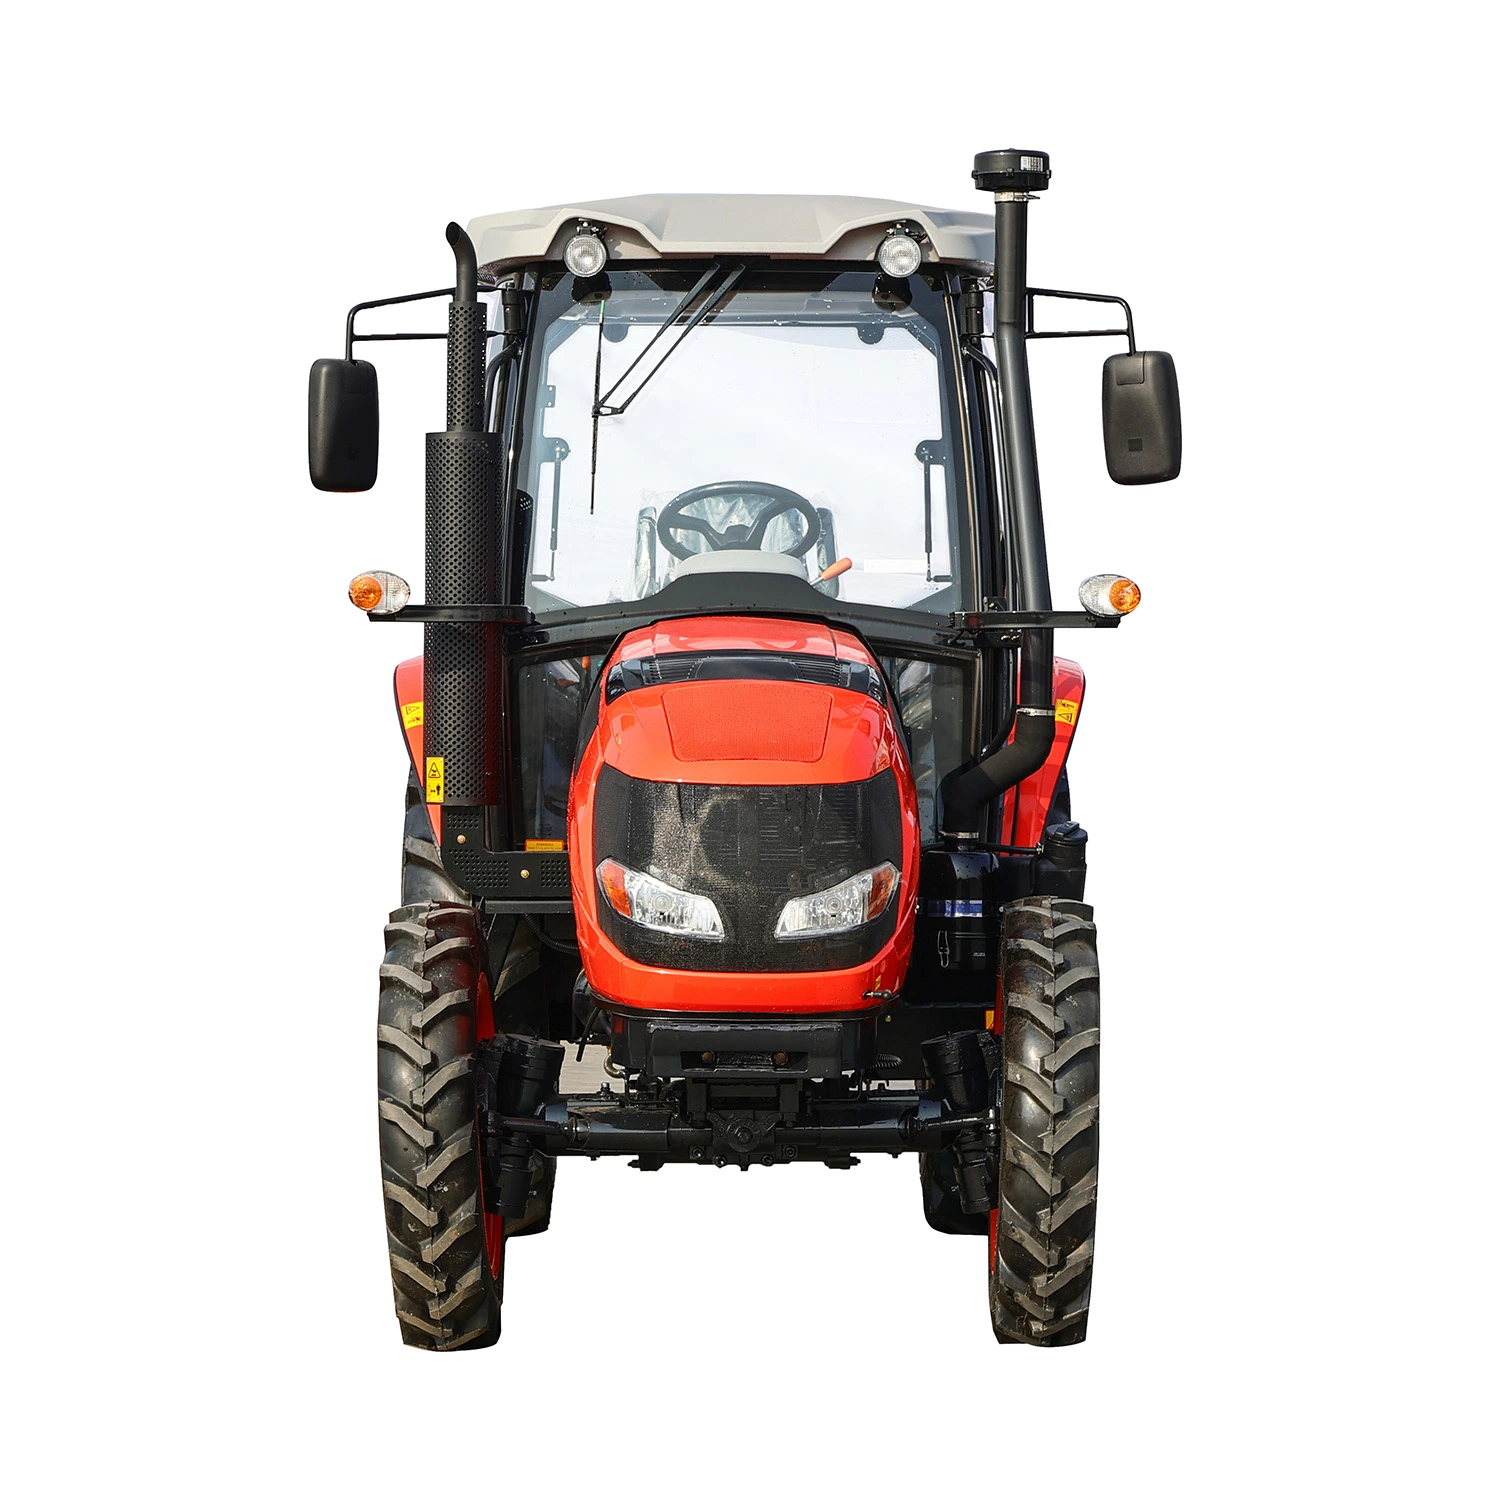 Good Quality Chinese Manufacturer of Agriculutual Tractor 4WD,45HP,50HP,60HP,70HP,75HP,80HP Europard Lovol Perkin Yuchai Carraro Z.F, Engine Farm Tractors